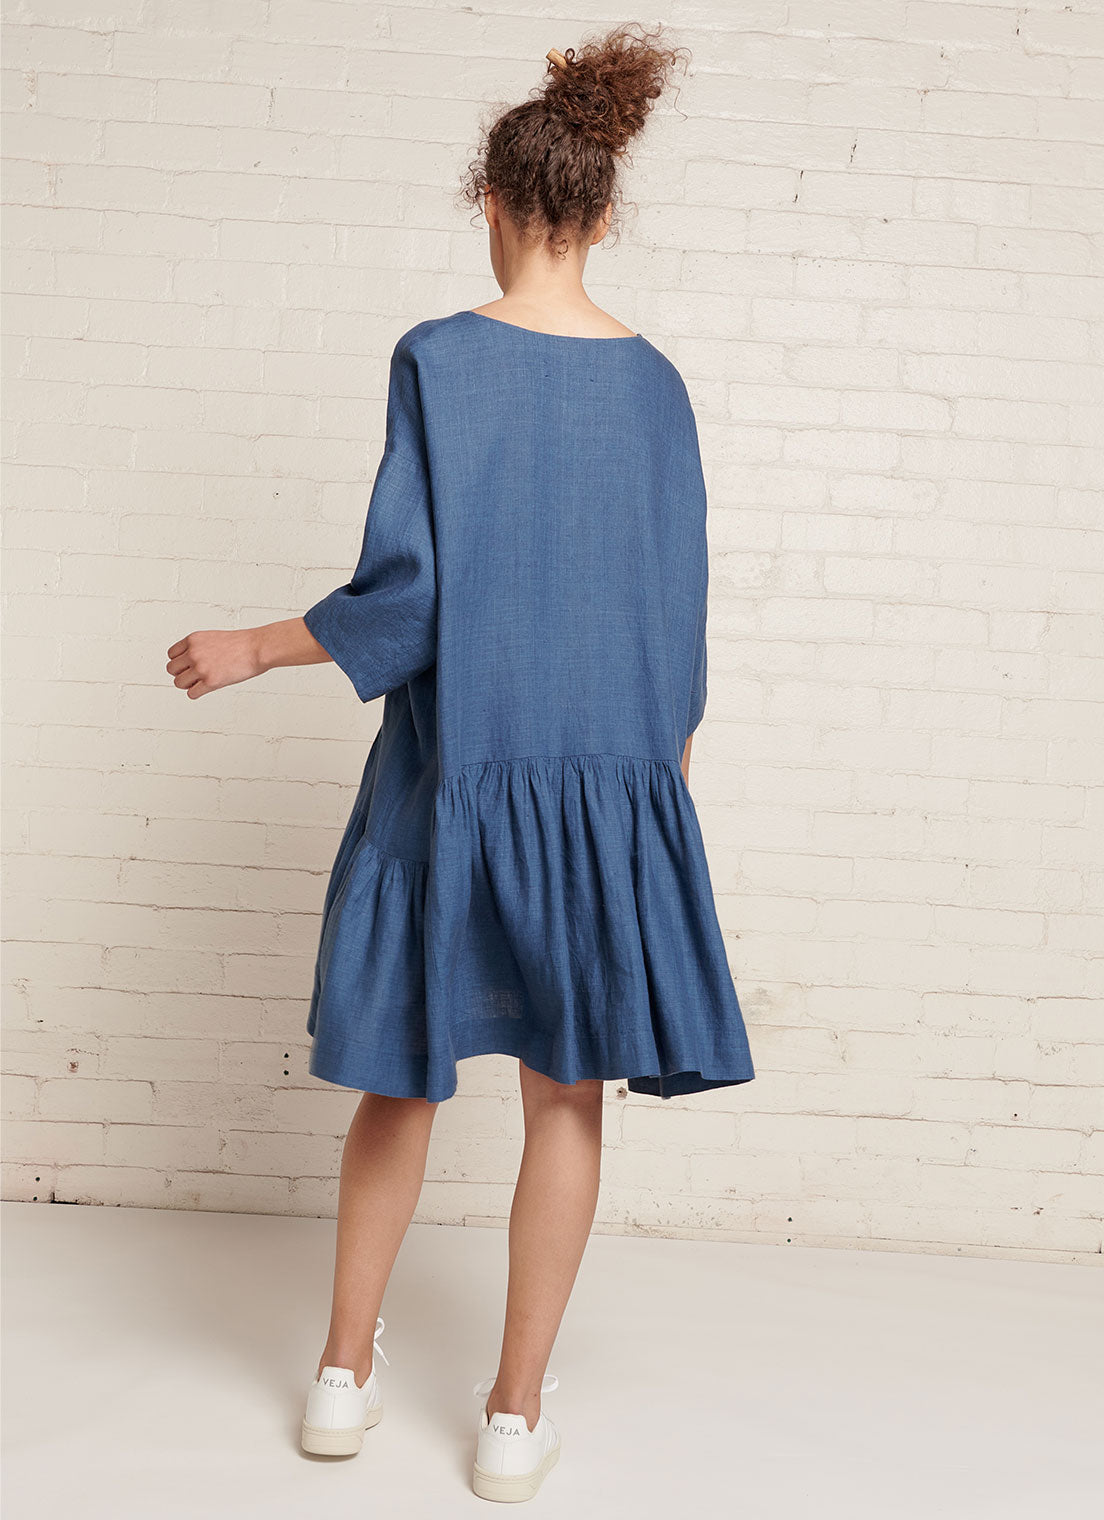 An indigo, easy fit, knee-length, square-cut dress with open neckline, 3/4 sleeves, and gathered detailing made from yarn dye washed linen